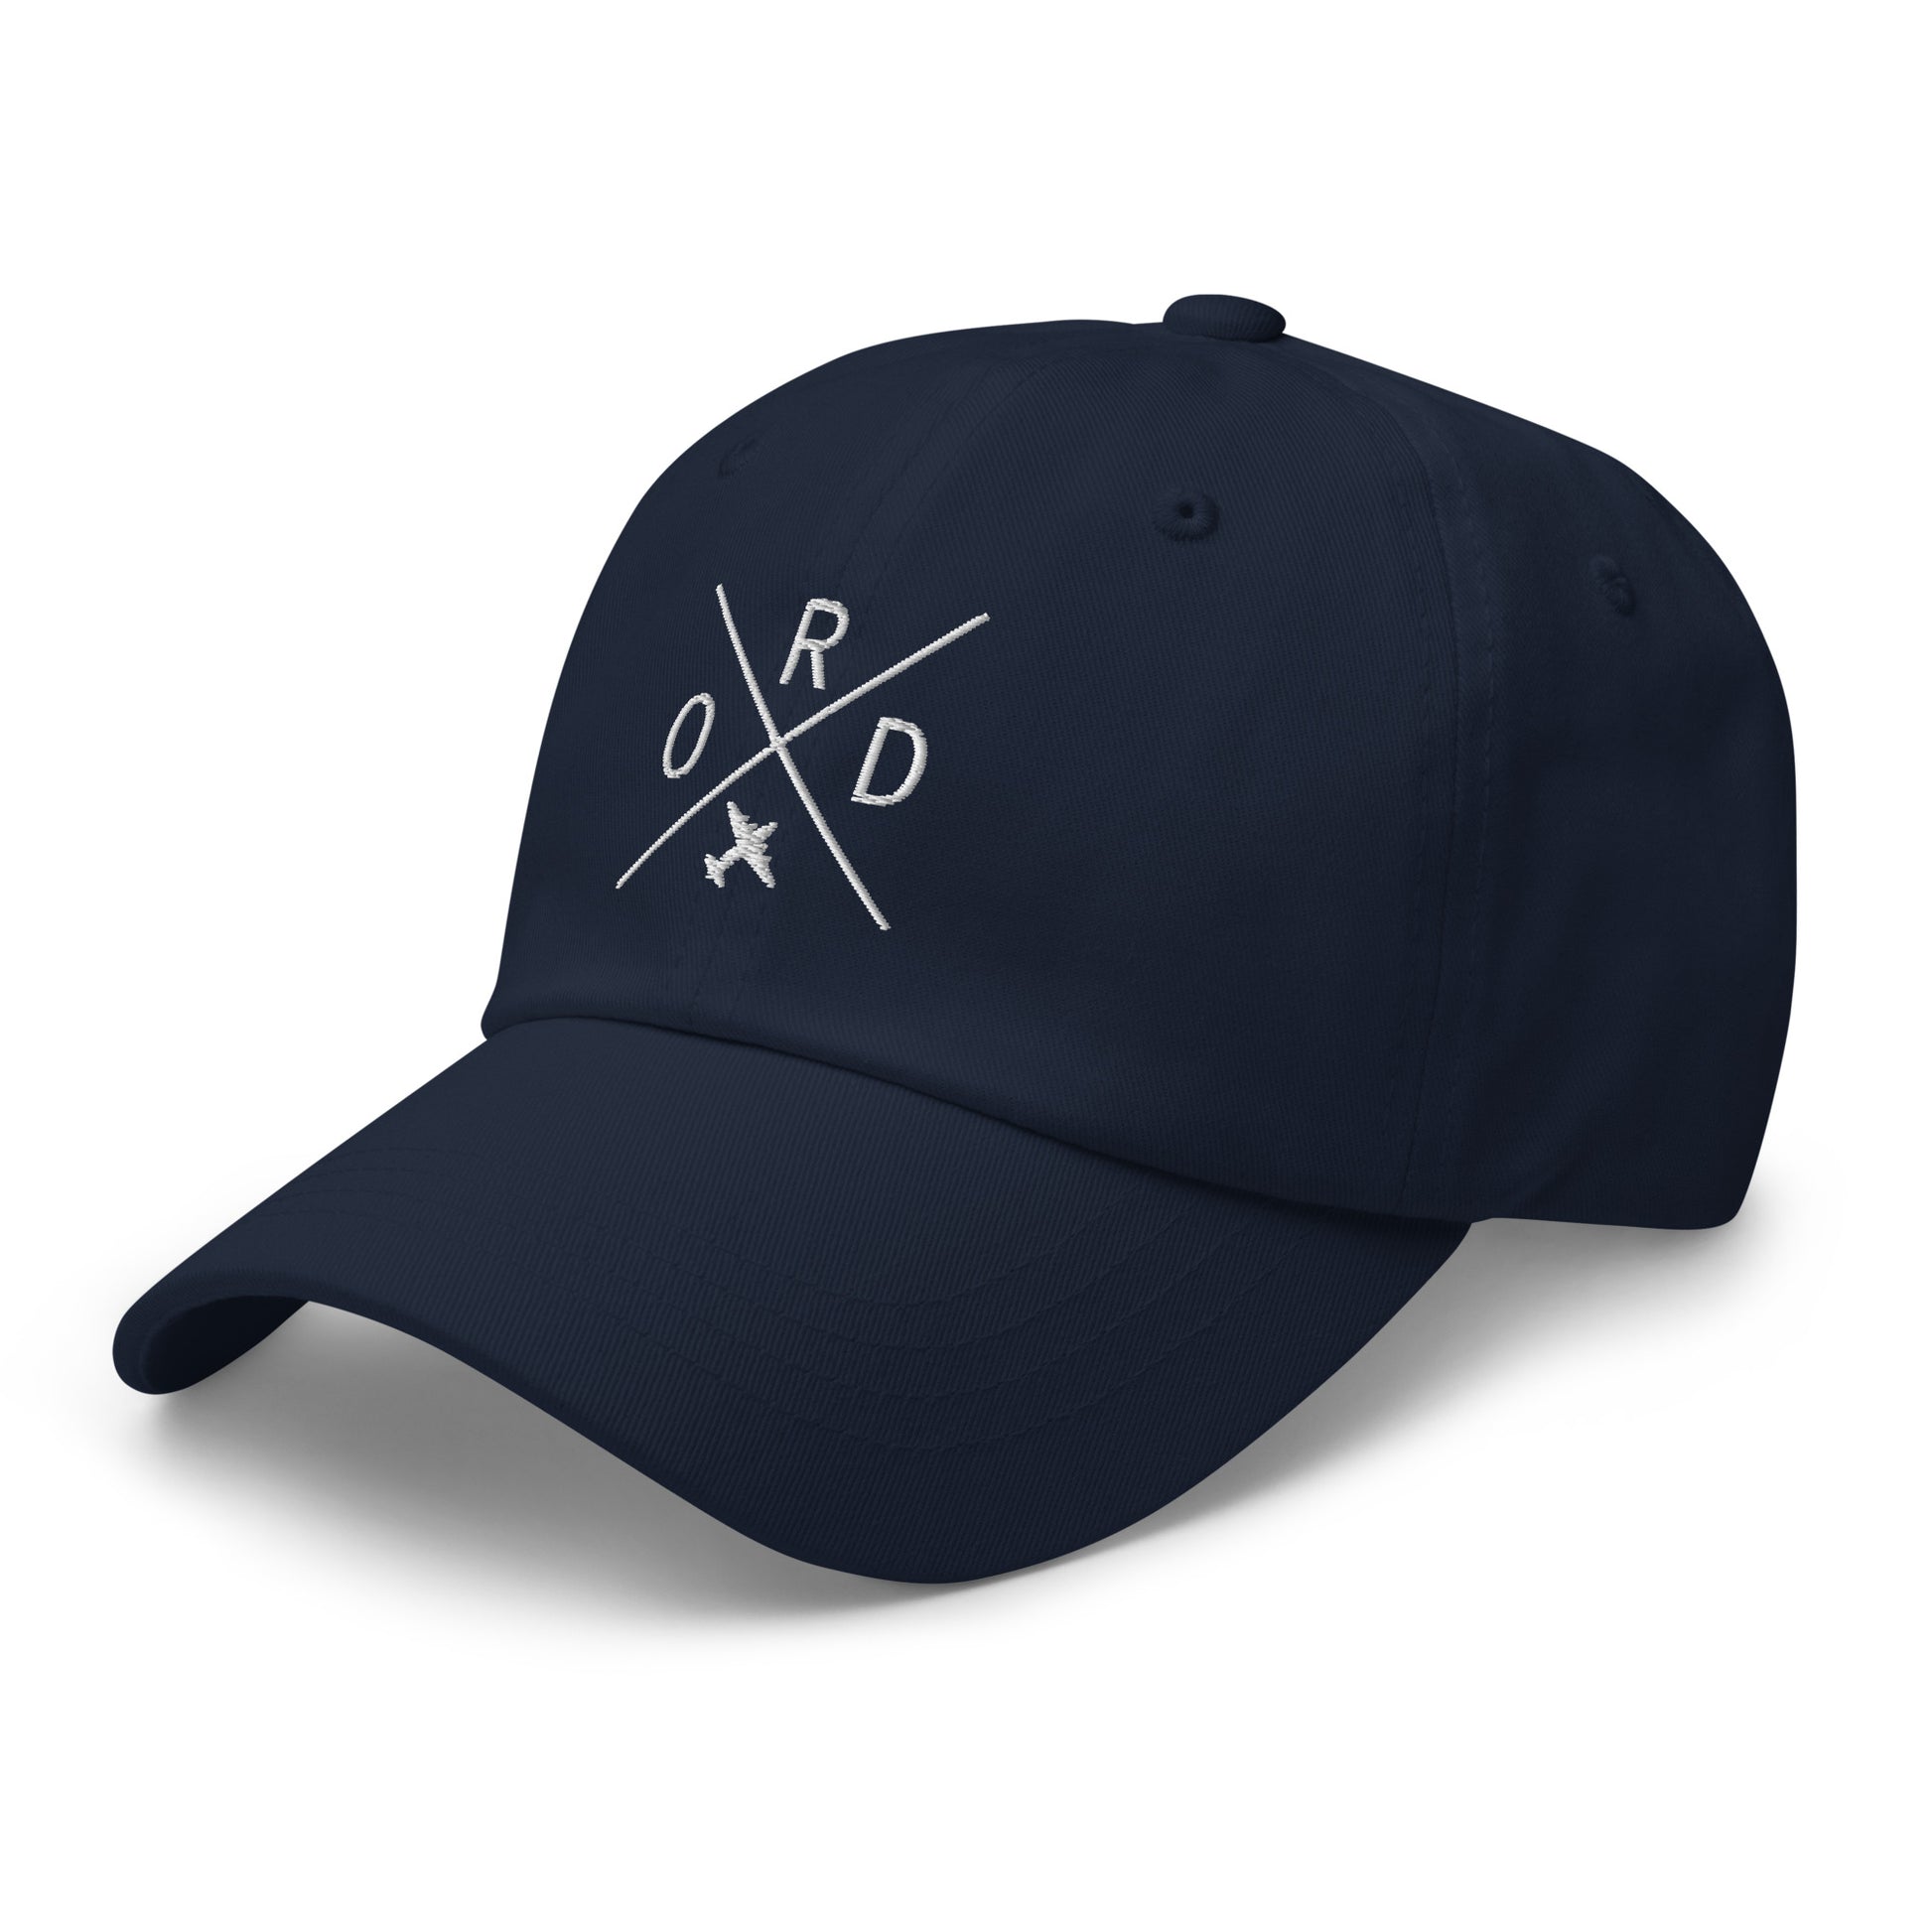 Crossed-X Dad Hat - White • ORD Chicago • YHM Designs - Image 18